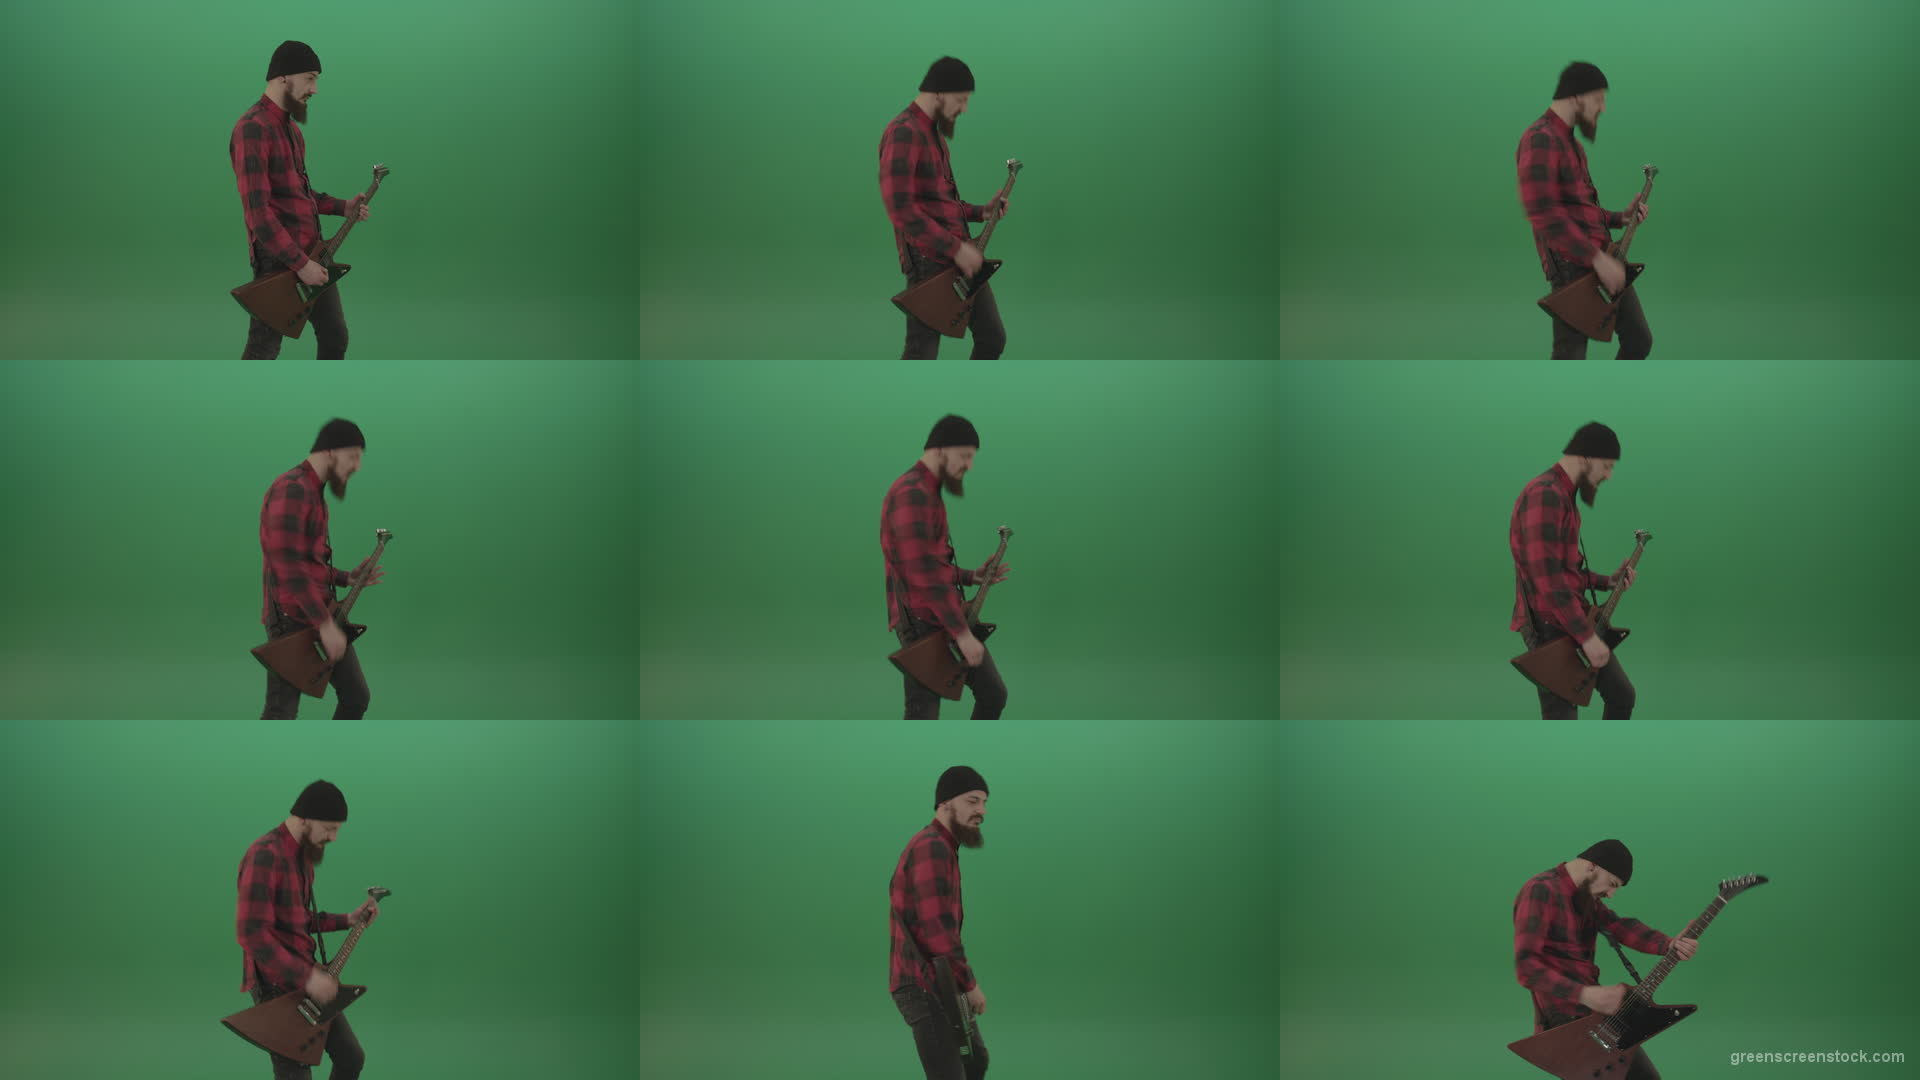 Young-man-with-beard-play-hardcore-music-on-guitar-in-side-view-on-green-screen-chromakey-background Green Screen Stock